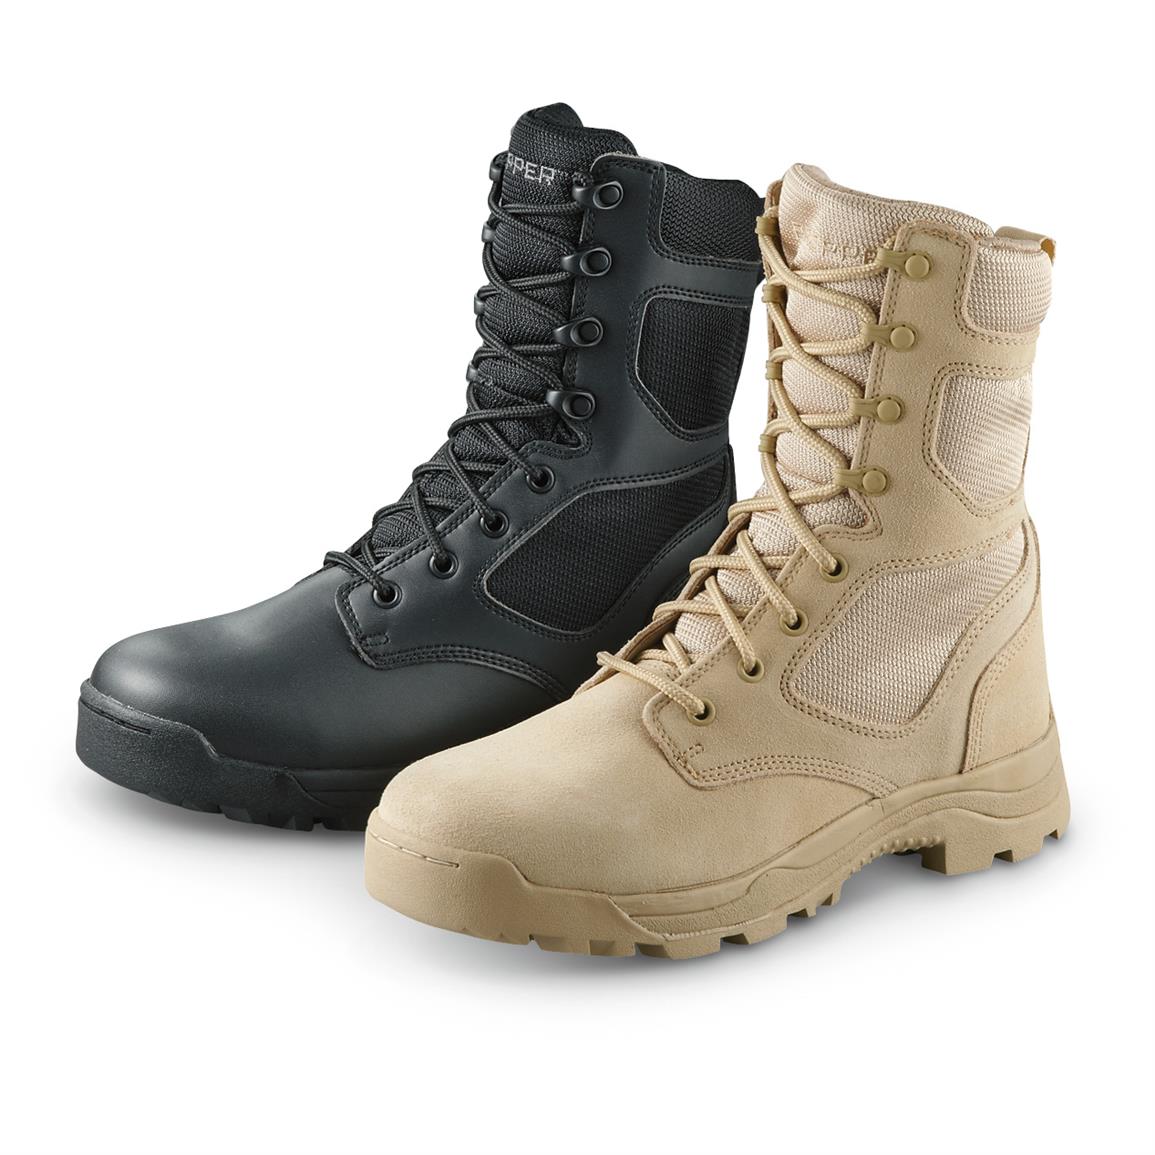 8 inch combat boots